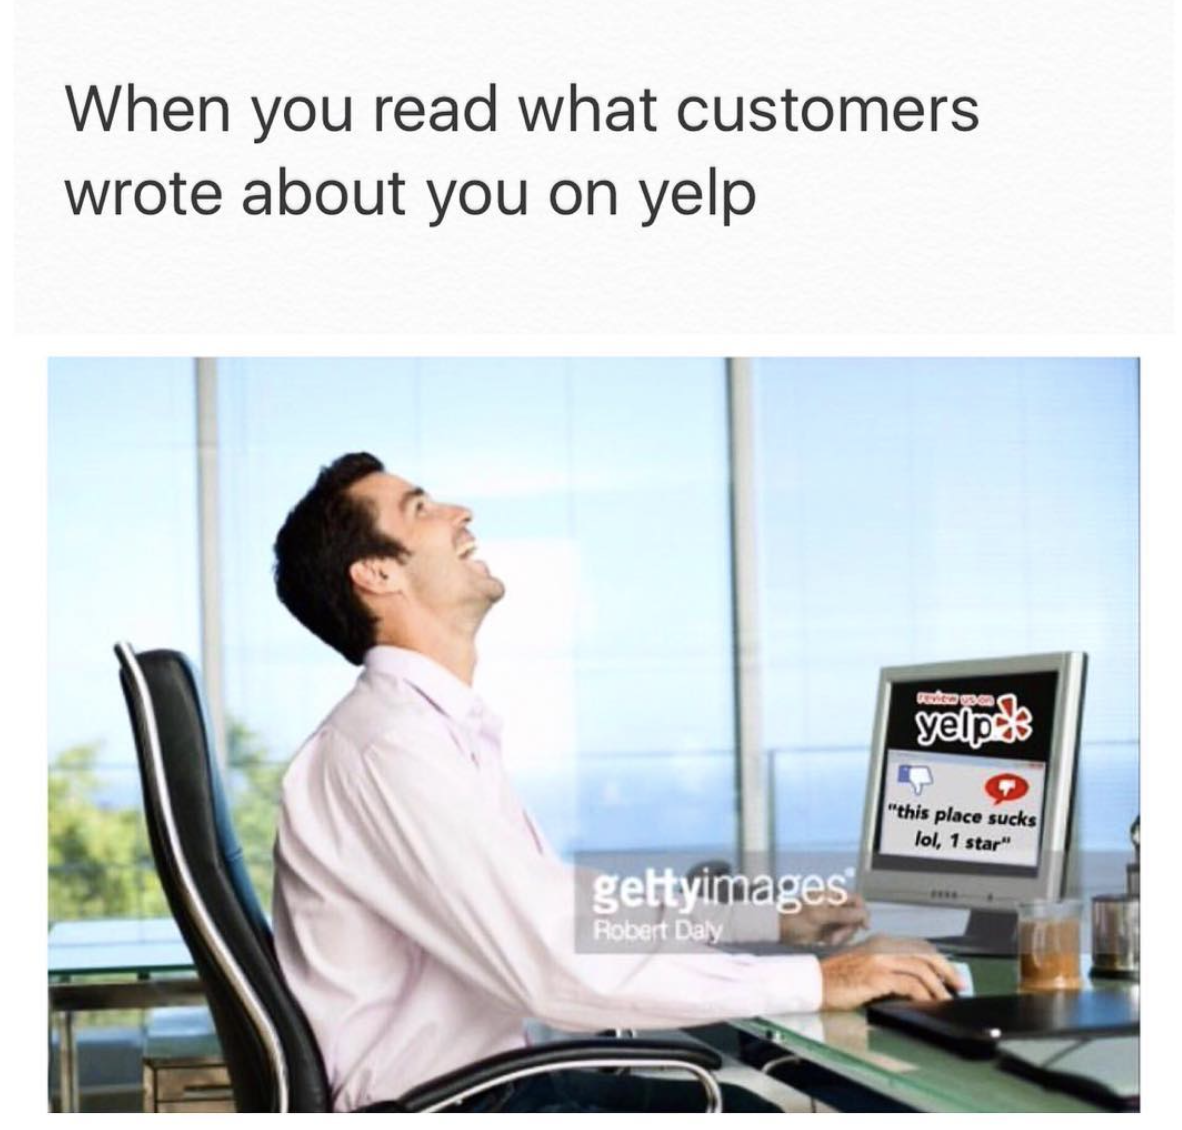 memes - white people love snitching so much - When you read what customers wrote about you on yelp yelpole this place sucks lol 1 star gettyimages Robert Daly